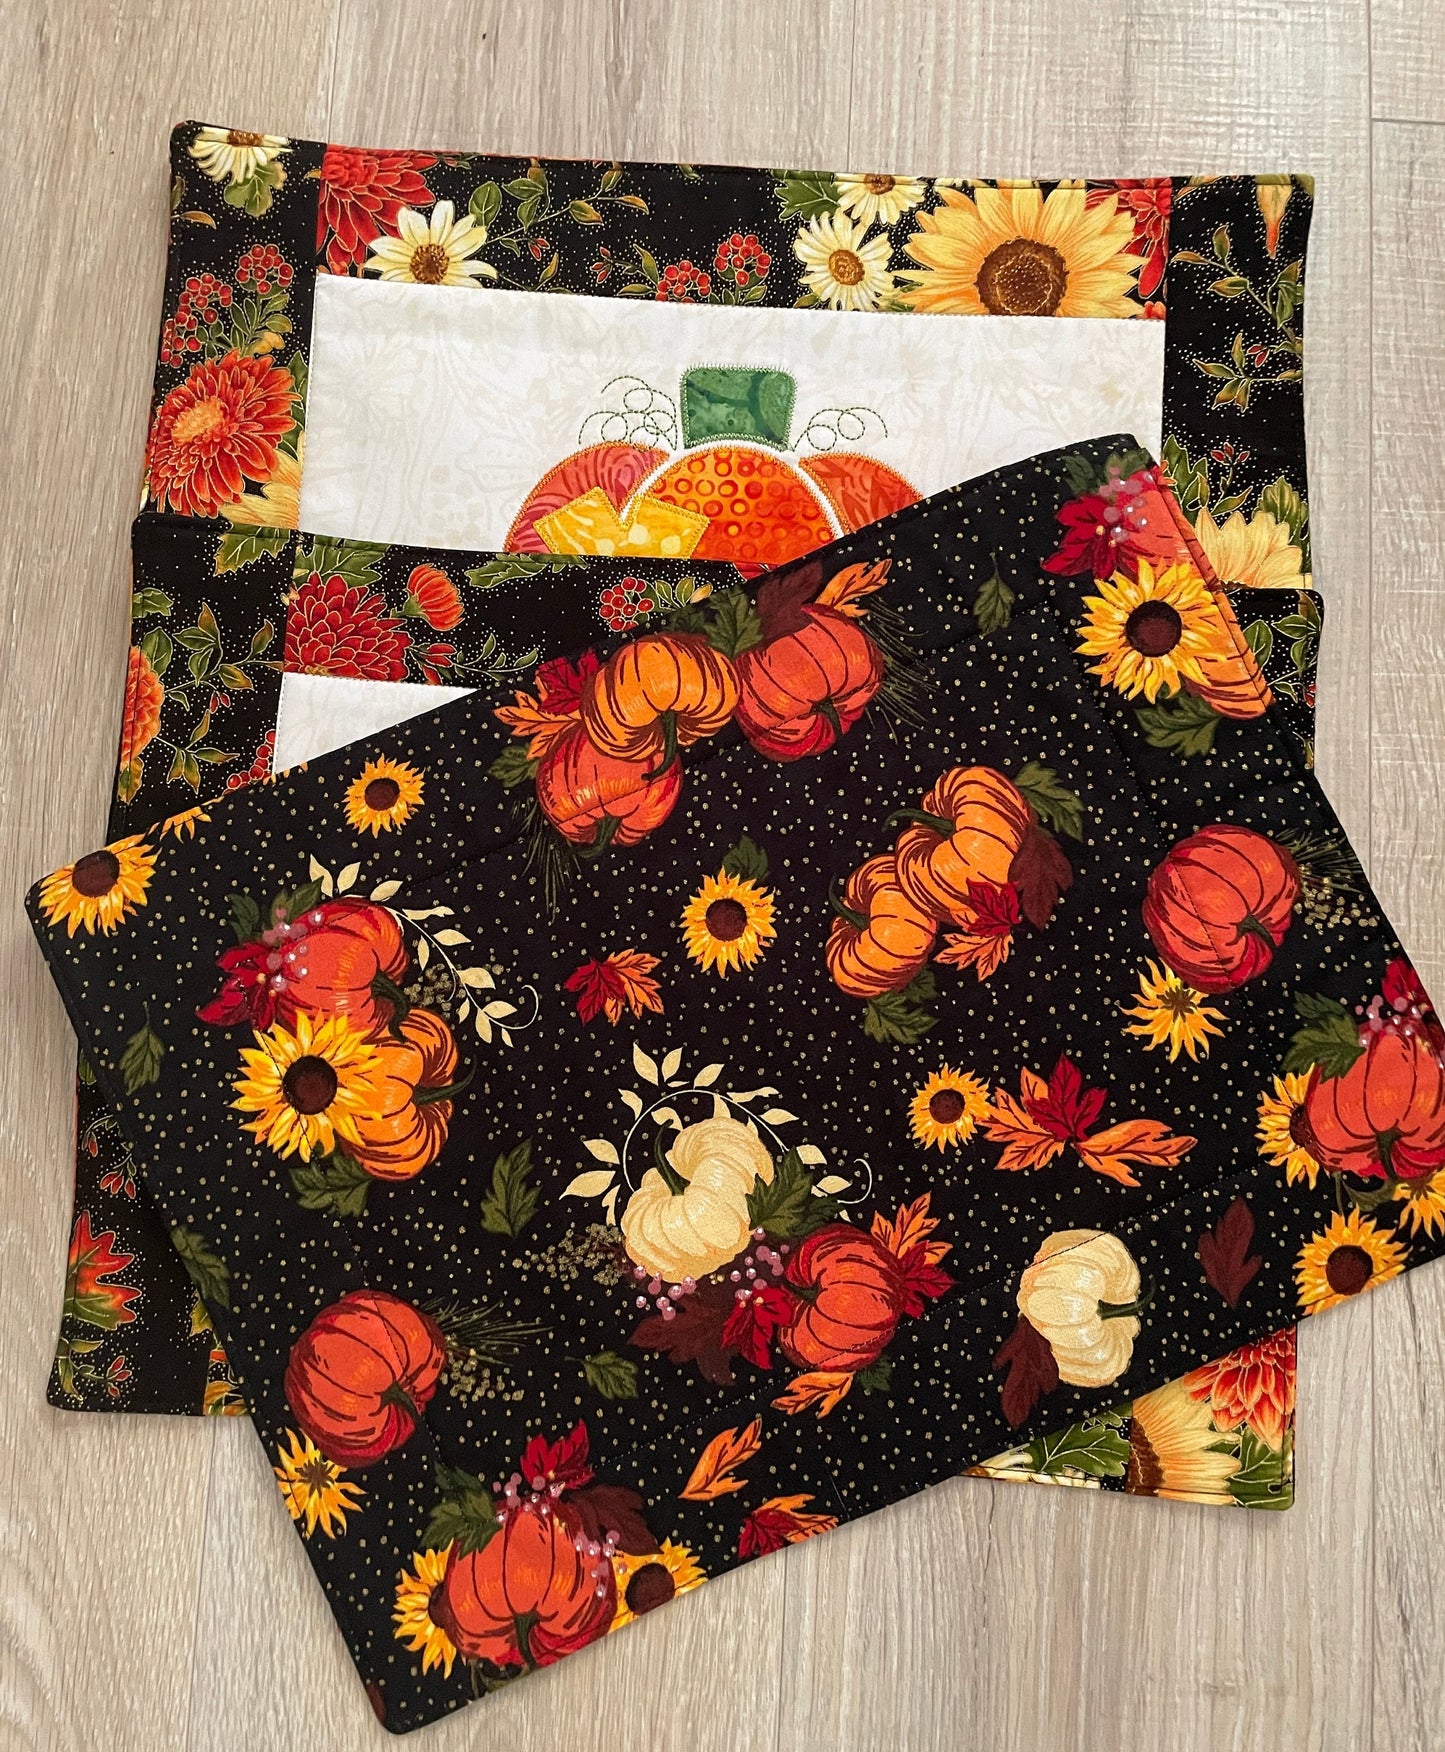 Handmade Fall Floral Pumpkin Placemats - Set of 4 - Quilted Harvest Table Decor